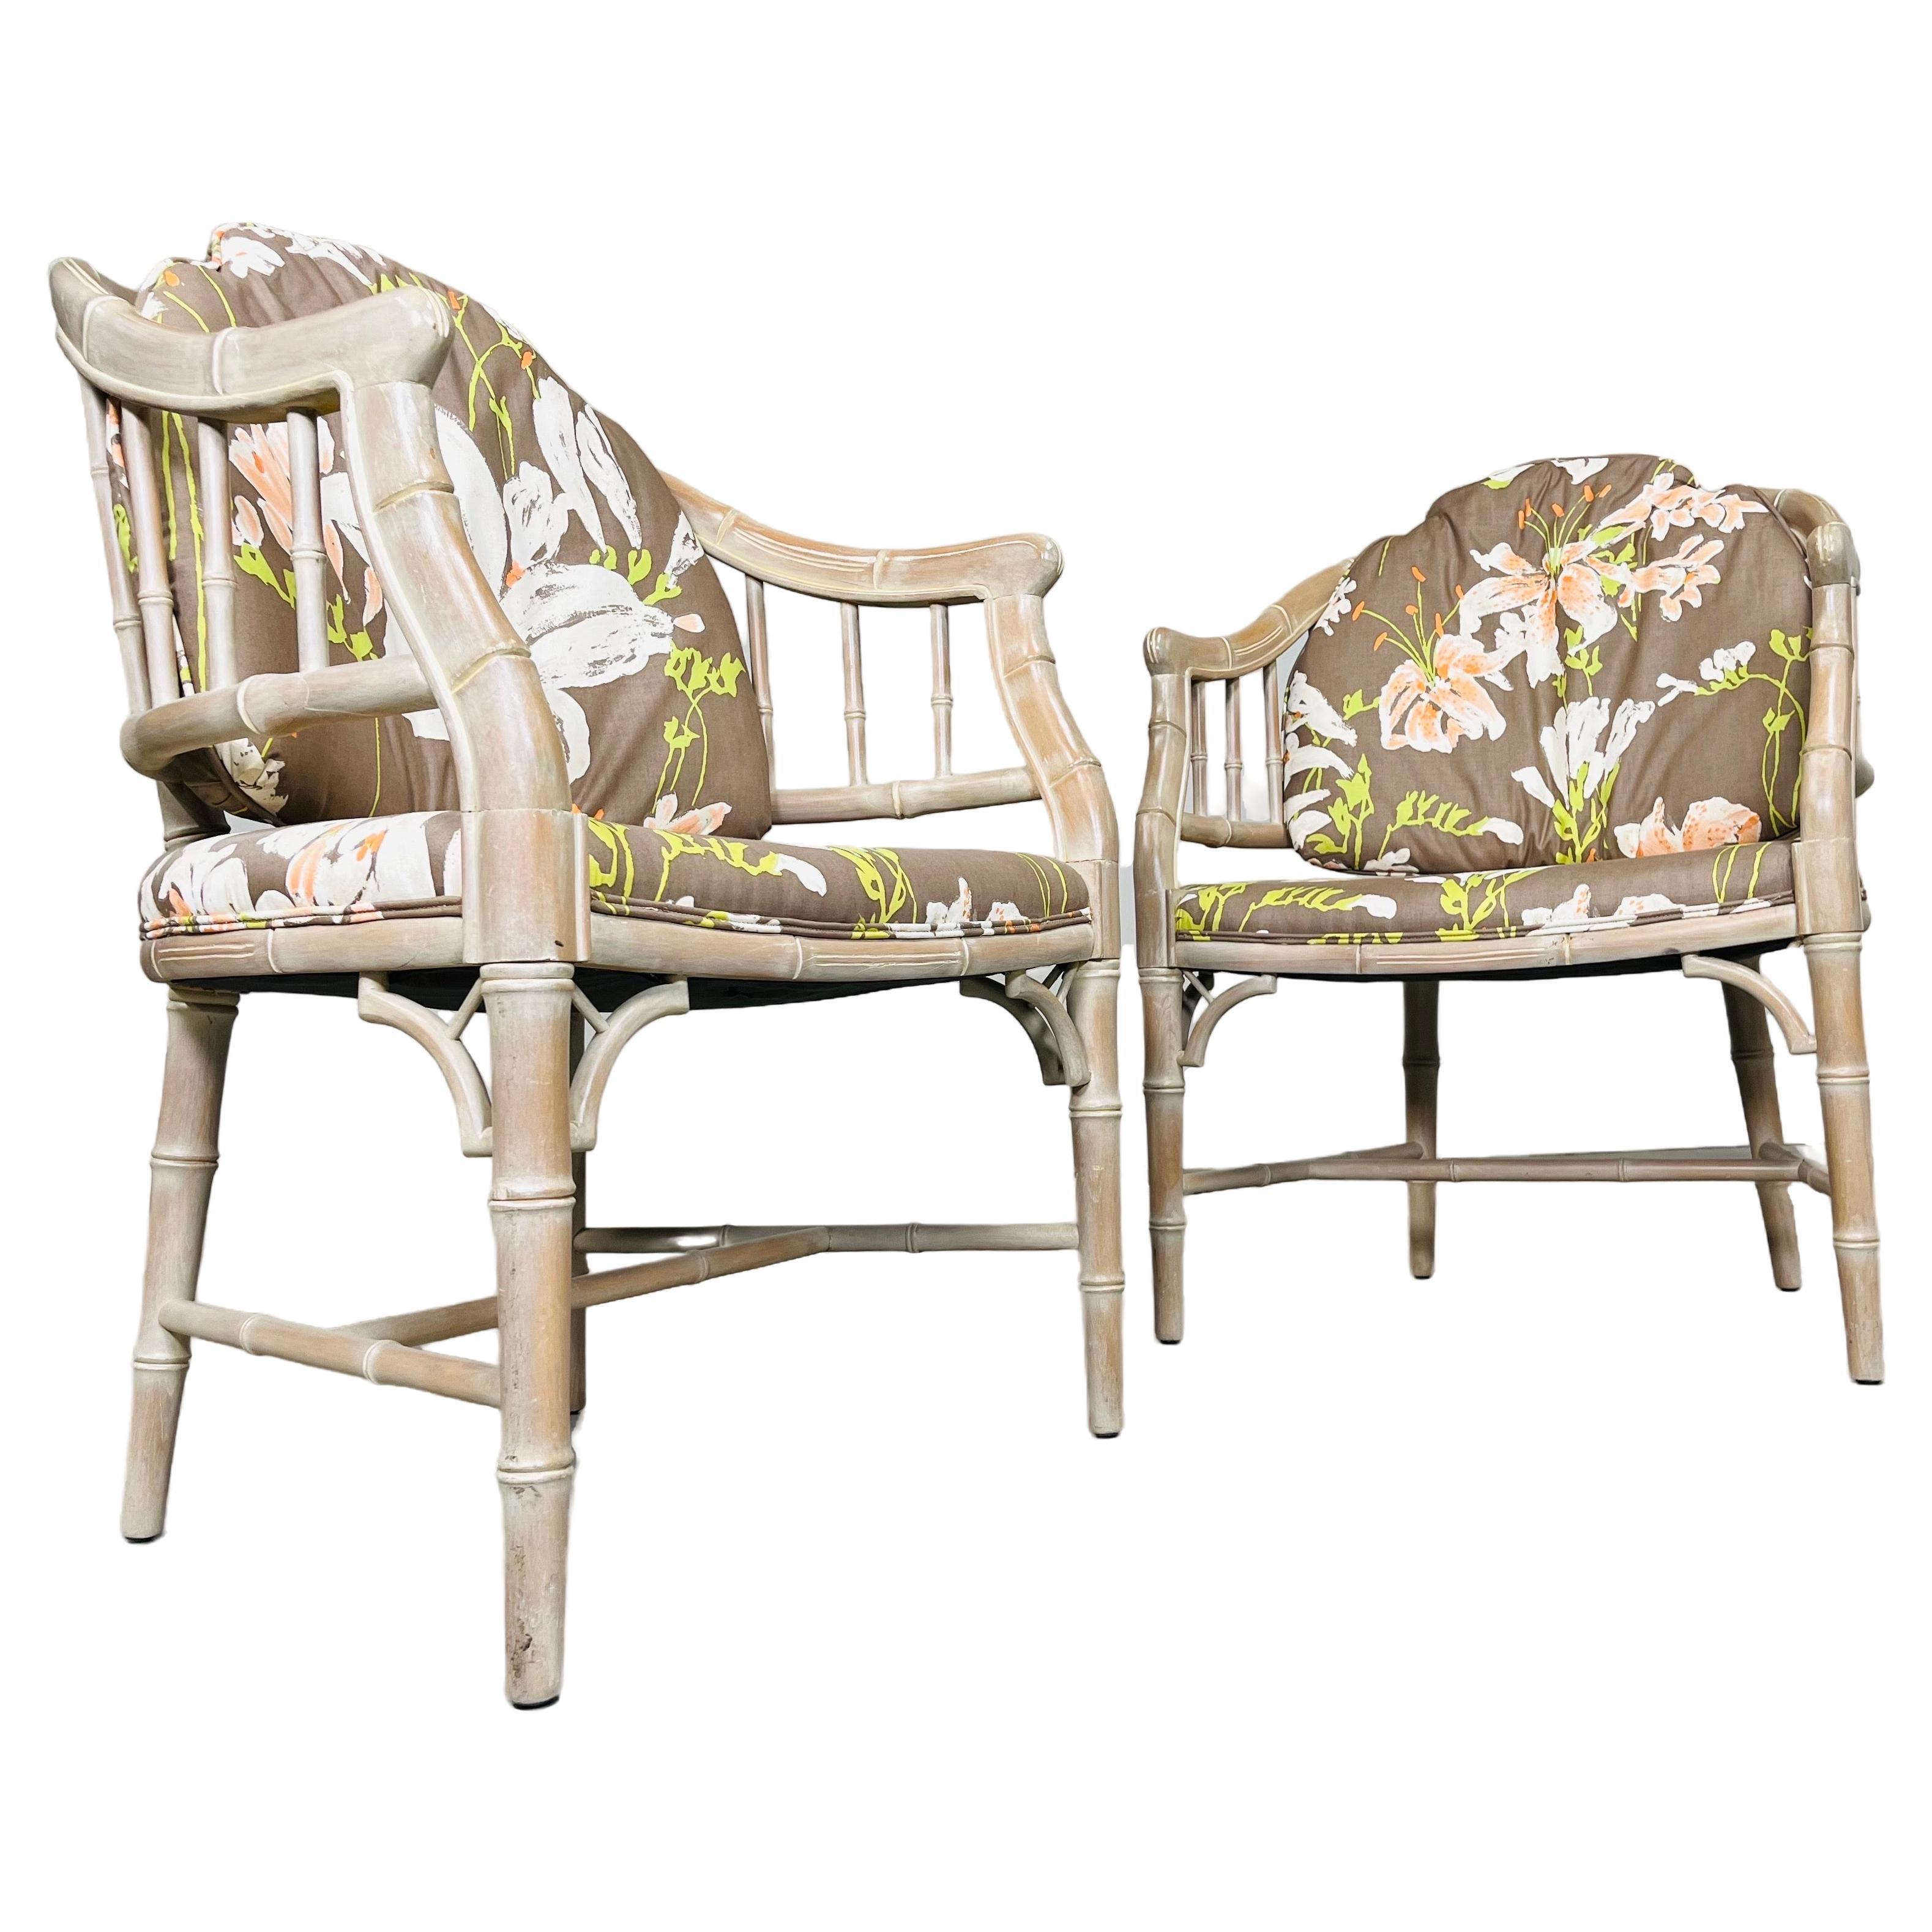 A beautiful pair of carved faux bamboo cerused easy chairs in the Chinese Chippendale style having Chinese inspired floral upholstery. In excellent condition having no damage and fresh upholstery and cushioning with internal lattice strap suspension